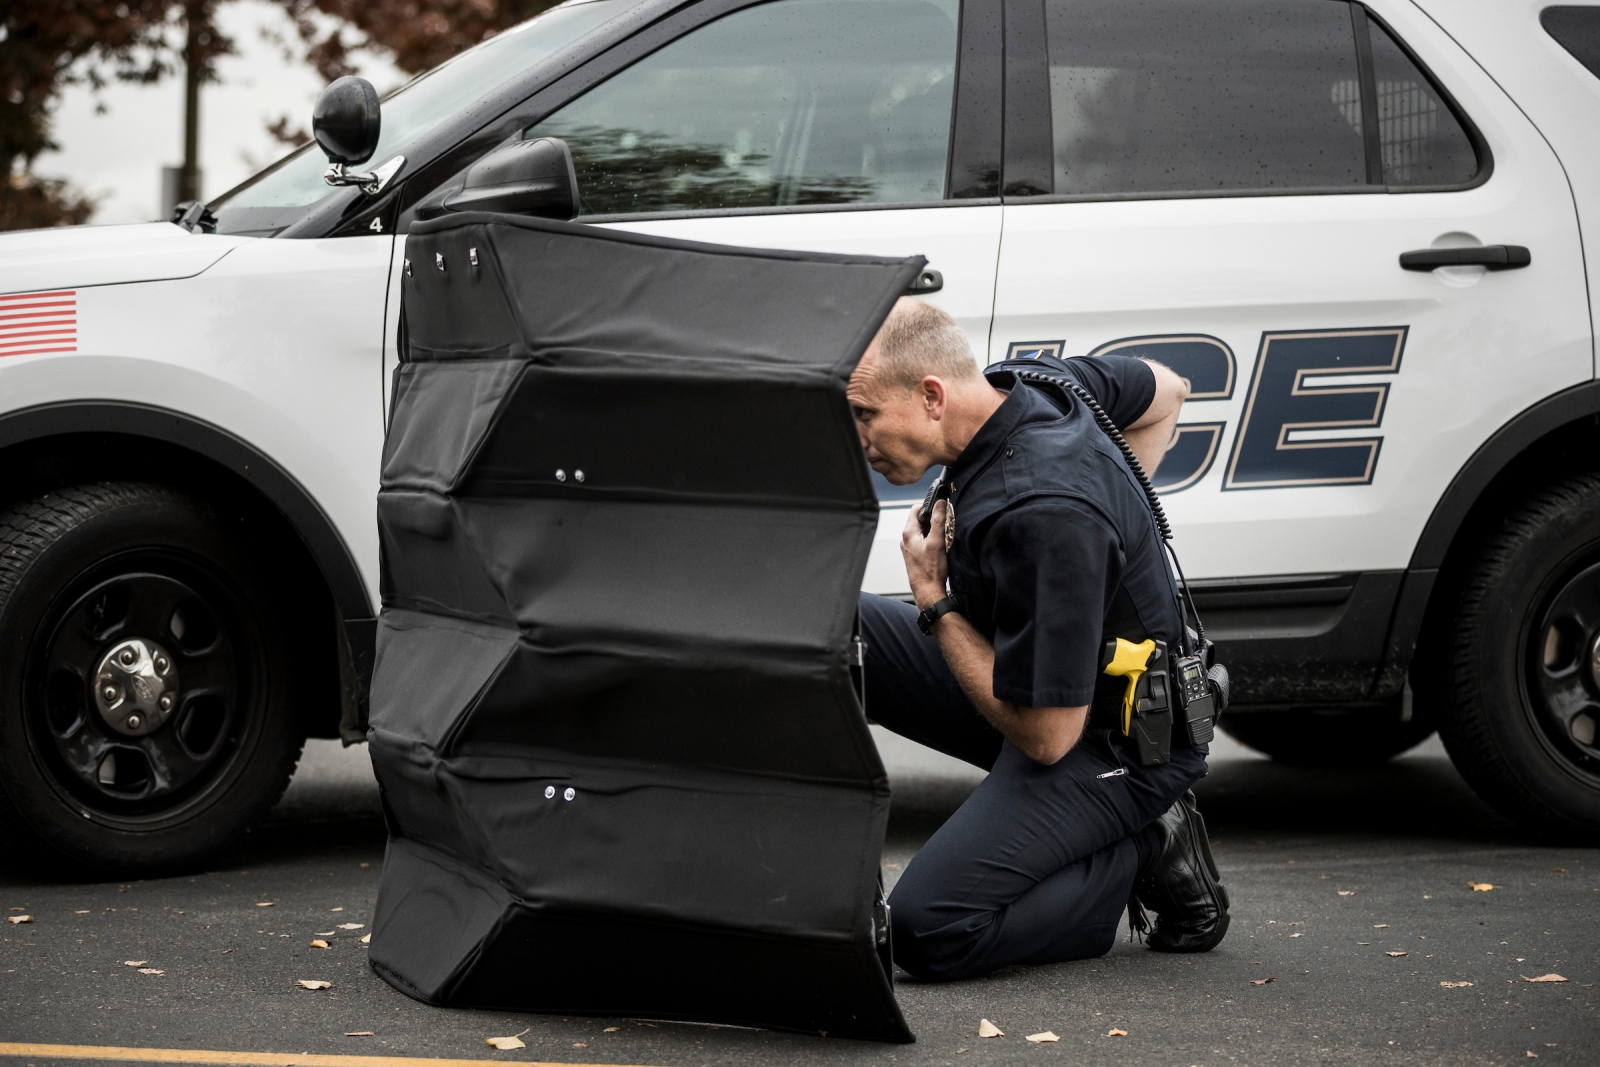 Origami bulletproof kevlar shield could revolutionise gunfire protection for FBI and police